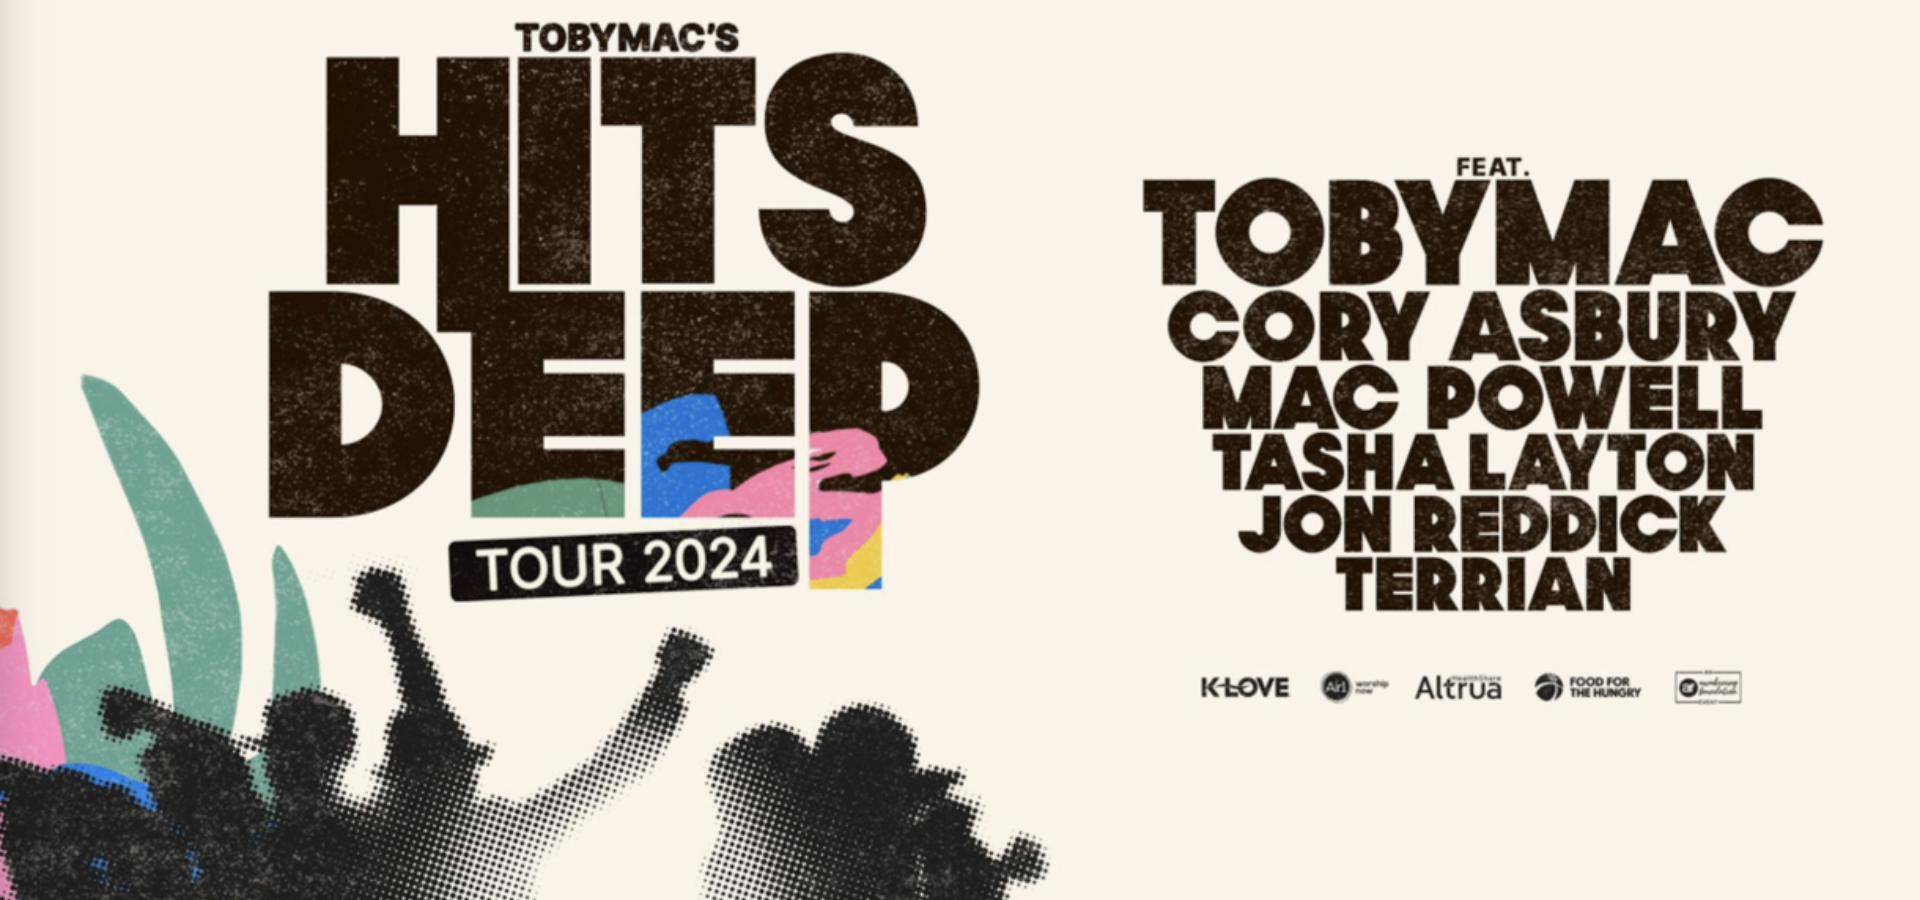 Tobymac 2024 Tour Dates Experience the Amazing Live Performance!